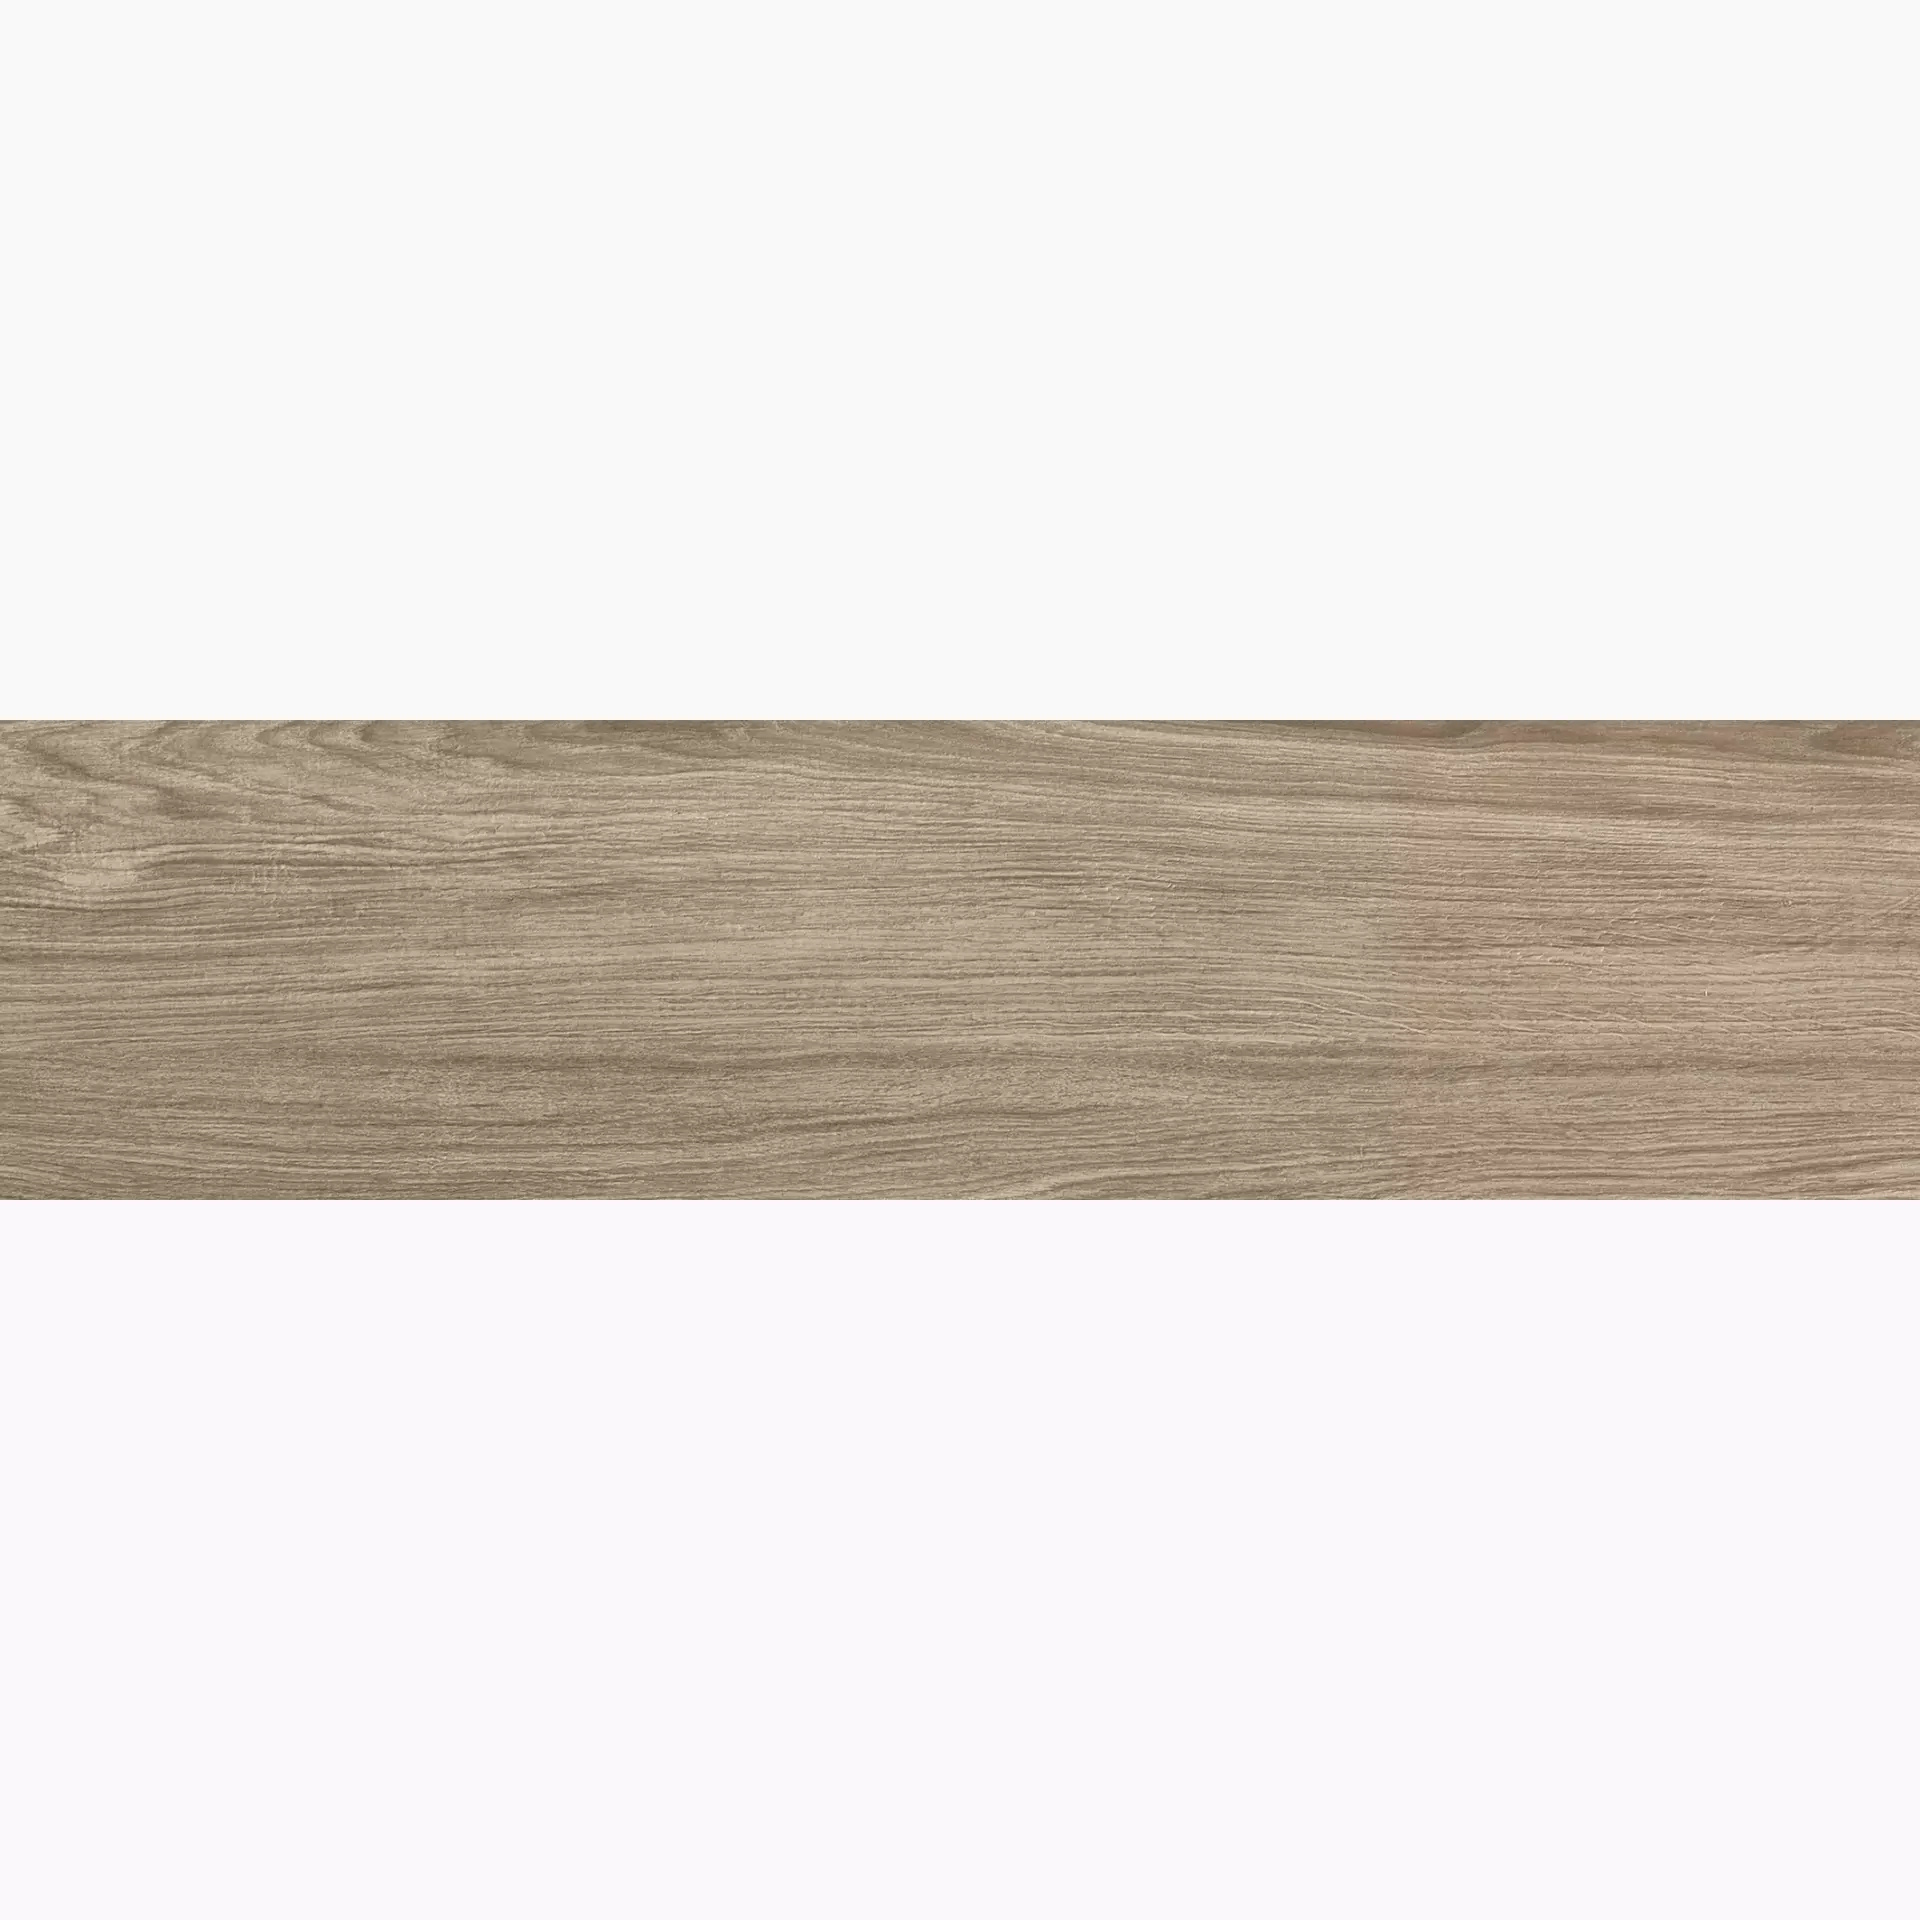 Refin Deck Day Naturale LZ25 22,5x90cm rectified 9mm